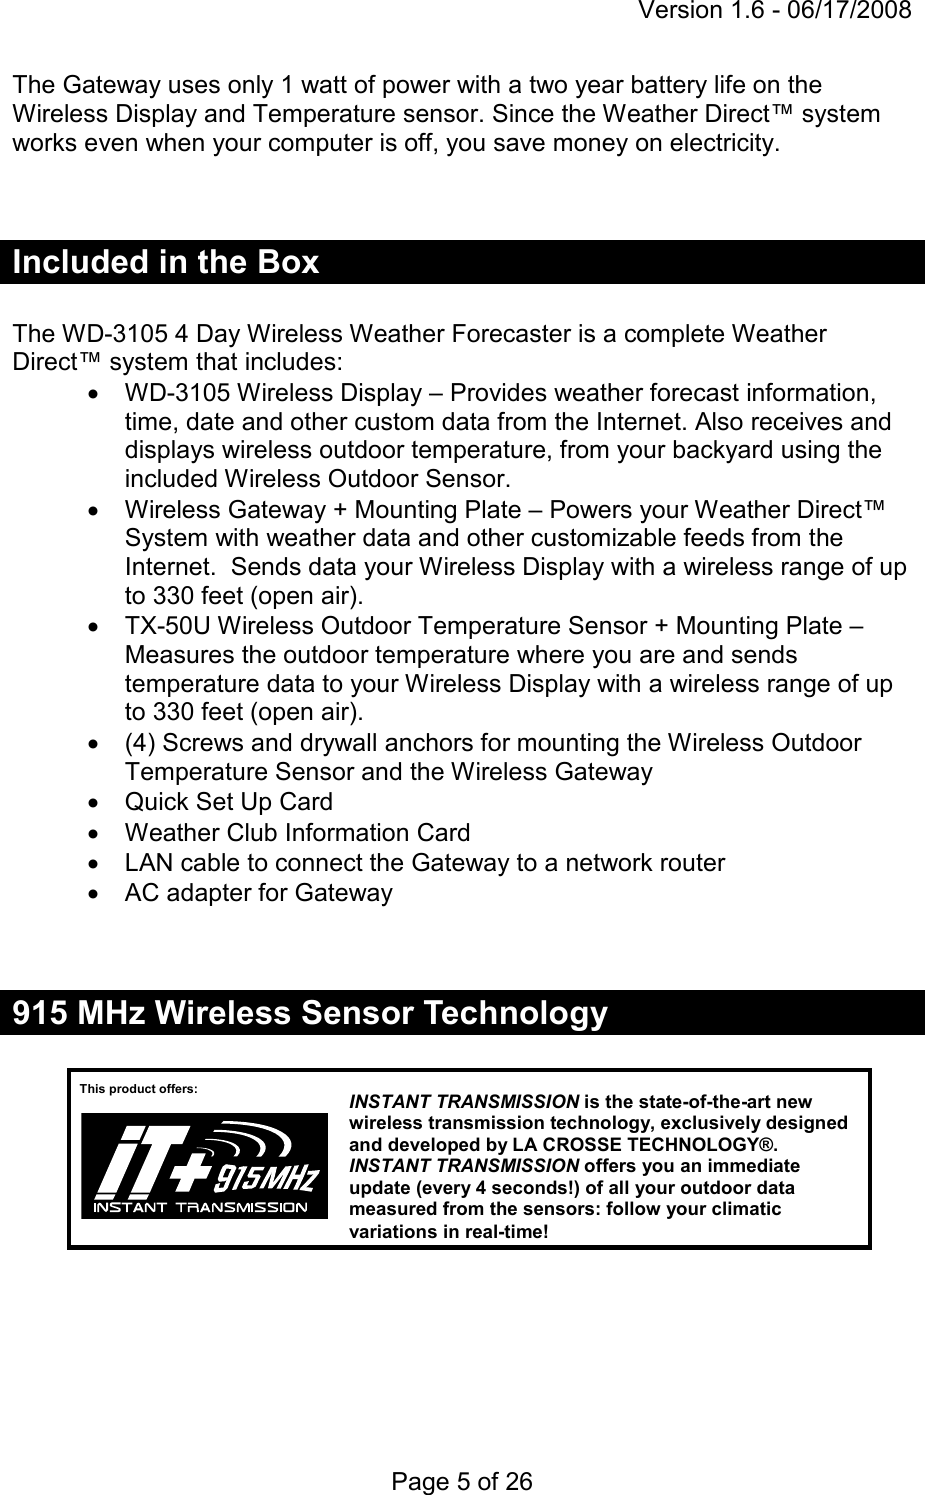 Version 1.6 - 06/17/2008 Page 5 of 26 The Gateway uses only 1 watt of power with a two year battery life on the Wireless Display and Temperature sensor. Since the Weather Direct™ system works even when your computer is off, you save money on electricity.    Included in the Box  The WD-3105 4 Day Wireless Weather Forecaster is a complete Weather Direct™ system that includes: •  WD-3105 Wireless Display – Provides weather forecast information, time, date and other custom data from the Internet. Also receives and displays wireless outdoor temperature, from your backyard using the included Wireless Outdoor Sensor. •  Wireless Gateway + Mounting Plate – Powers your Weather Direct™ System with weather data and other customizable feeds from the Internet.  Sends data your Wireless Display with a wireless range of up to 330 feet (open air). •  TX-50U Wireless Outdoor Temperature Sensor + Mounting Plate – Measures the outdoor temperature where you are and sends temperature data to your Wireless Display with a wireless range of up to 330 feet (open air). •  (4) Screws and drywall anchors for mounting the Wireless Outdoor Temperature Sensor and the Wireless Gateway •  Quick Set Up Card •  Weather Club Information Card •  LAN cable to connect the Gateway to a network router •  AC adapter for Gateway   915 MHz Wireless Sensor Technology         This product offers: INSTANT TRANSMISSION is the state-of-the-art new wireless transmission technology, exclusively designed and developed by LA CROSSE TECHNOLOGY®. INSTANT TRANSMISSION offers you an immediate update (every 4 seconds!) of all your outdoor data measured from the sensors: follow your climatic variations in real-time! 